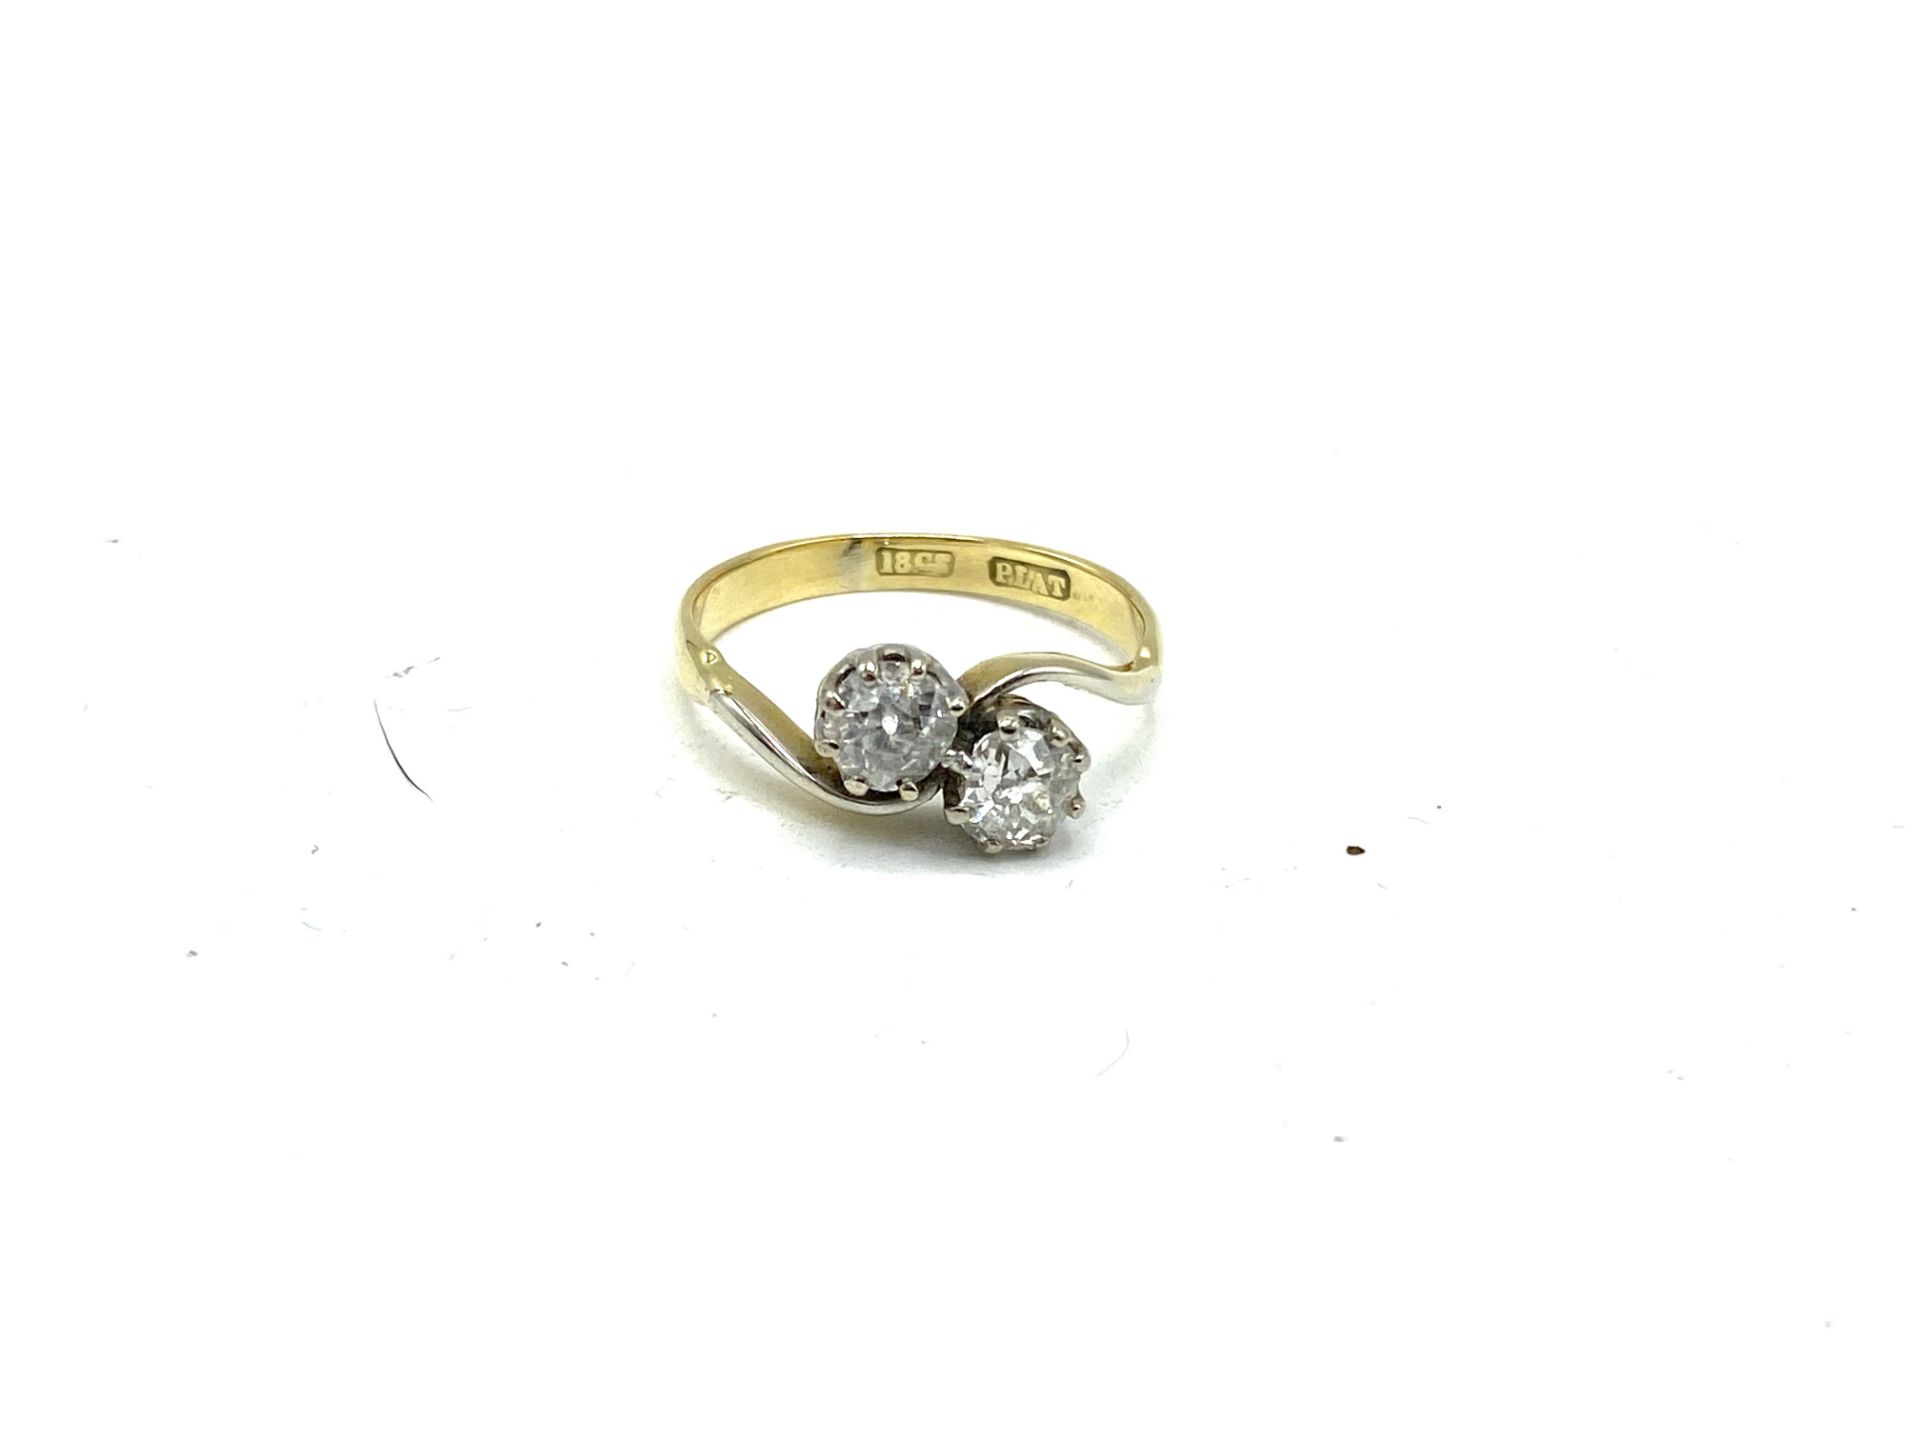 18ct gold diamond two stone ring - Image 2 of 4